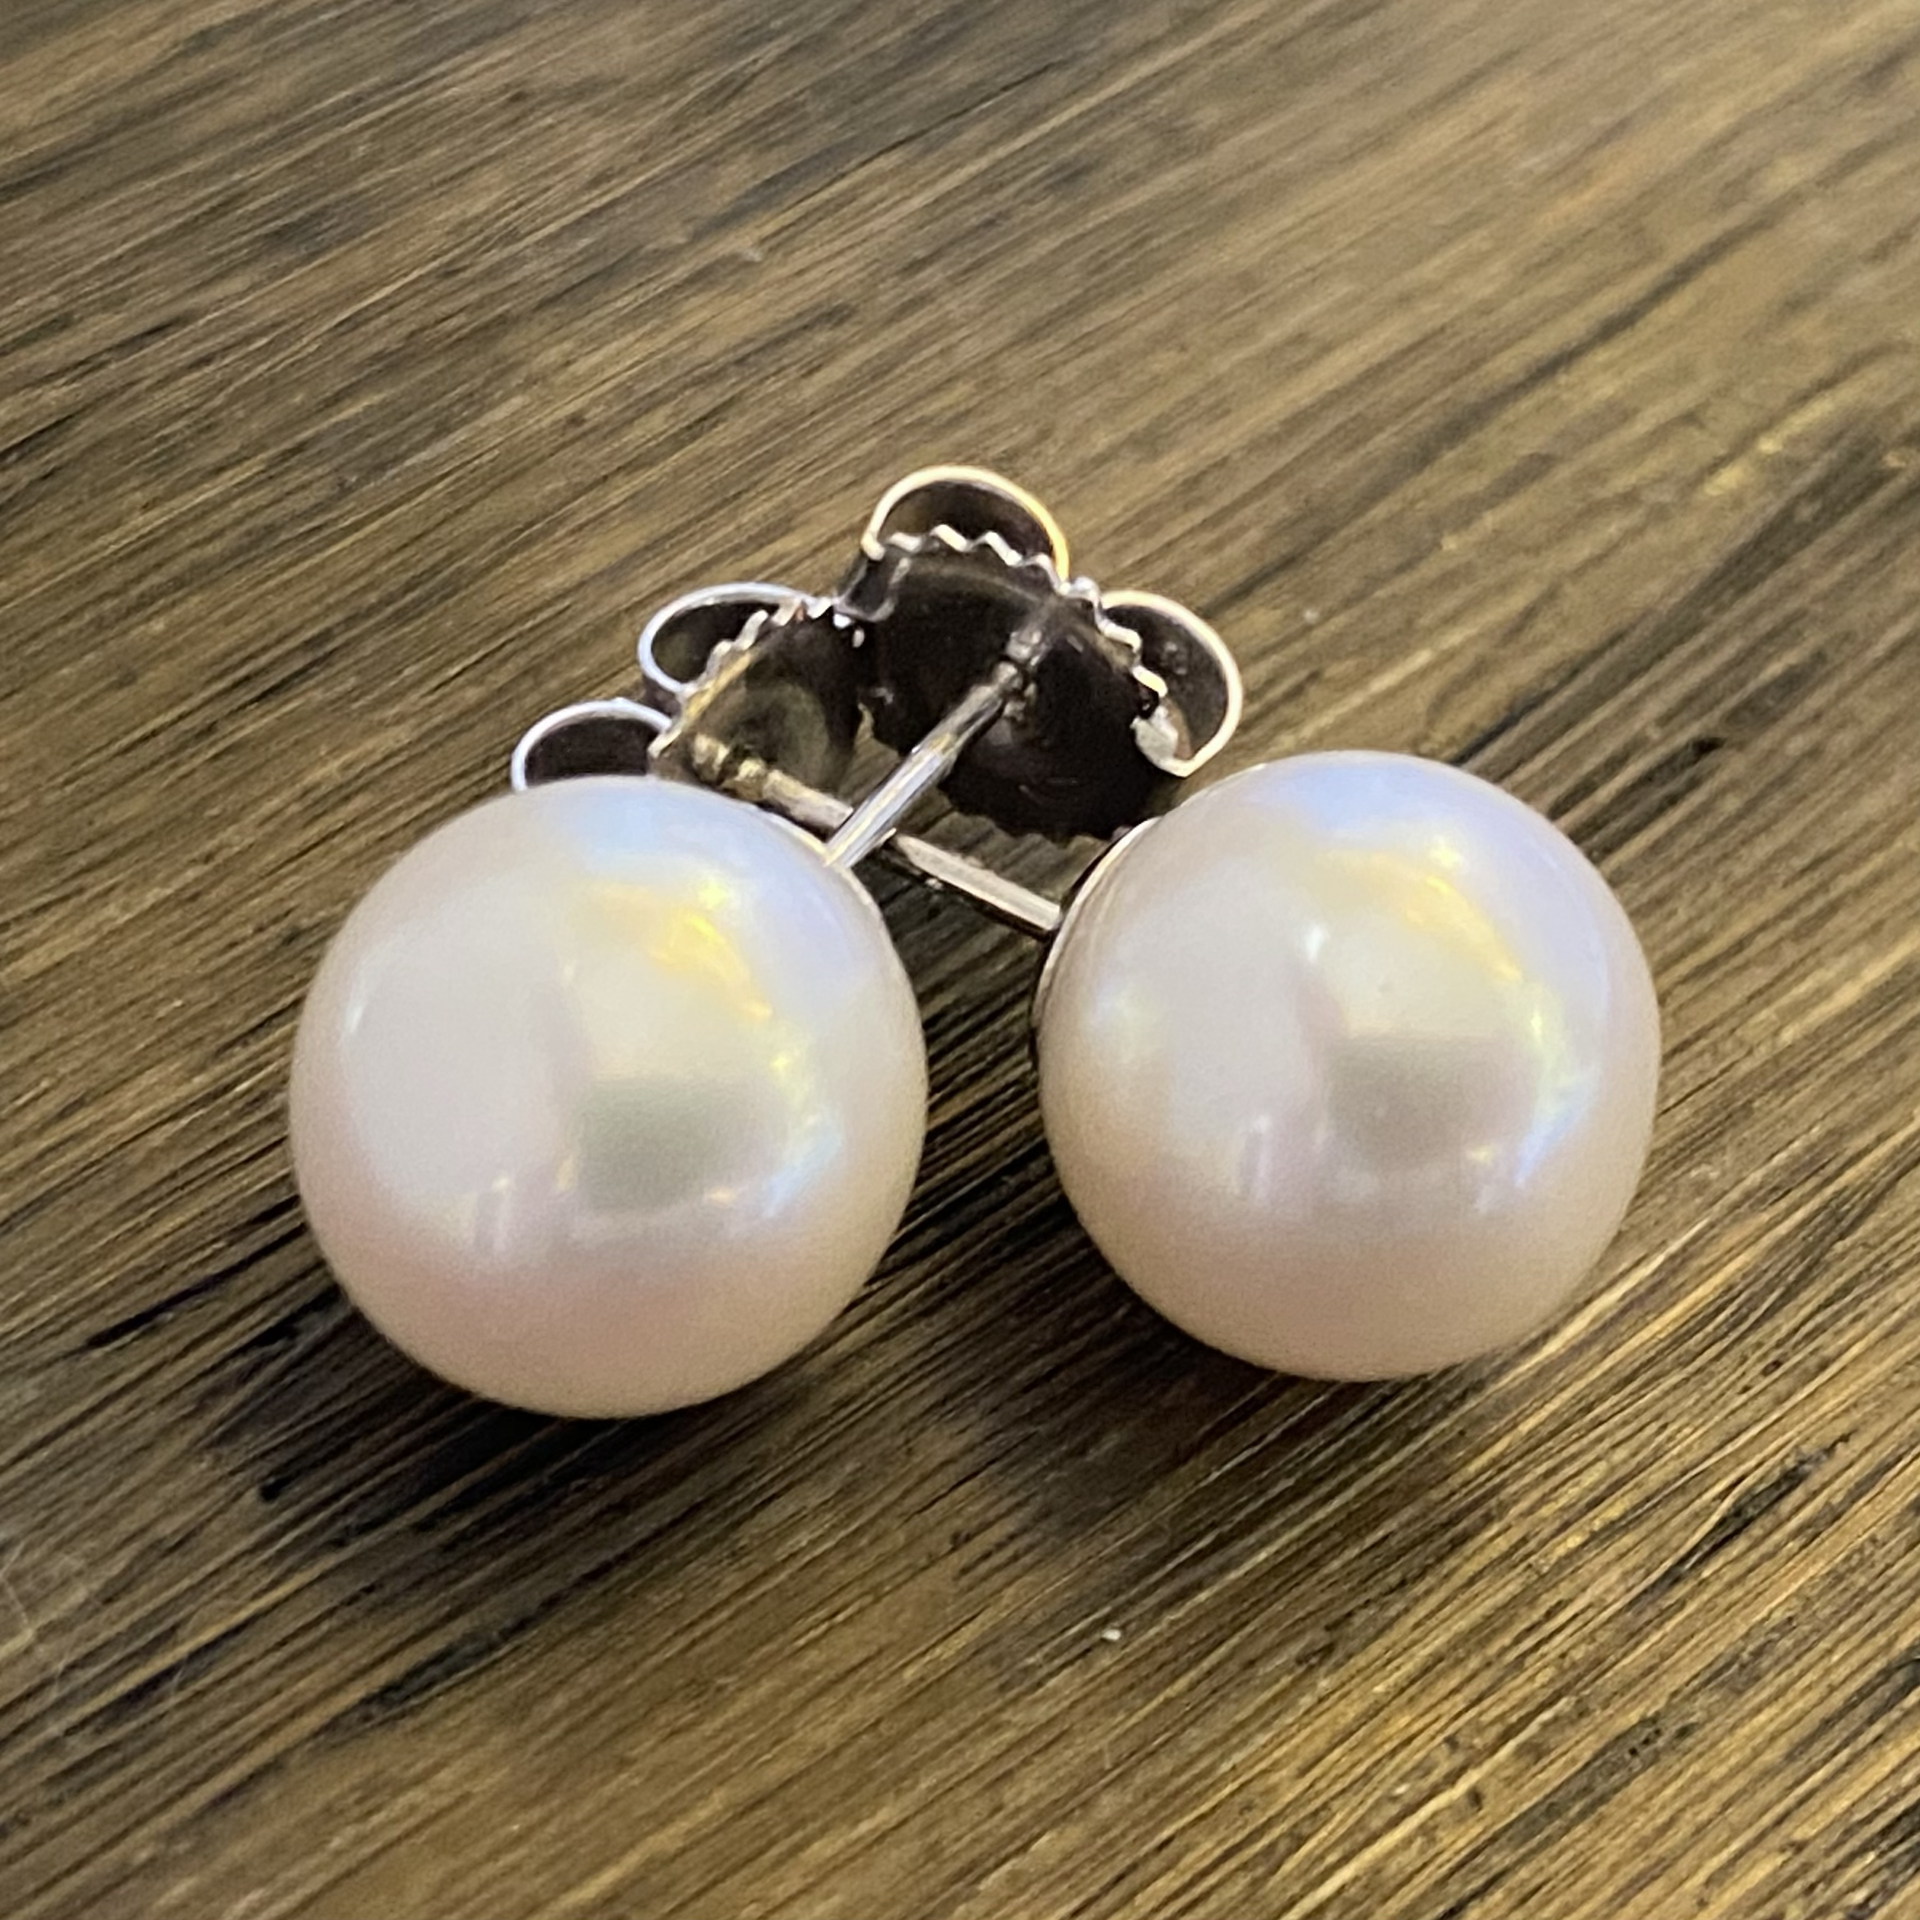 White Round Pearl Earrings 10mm by Sidney Soriano